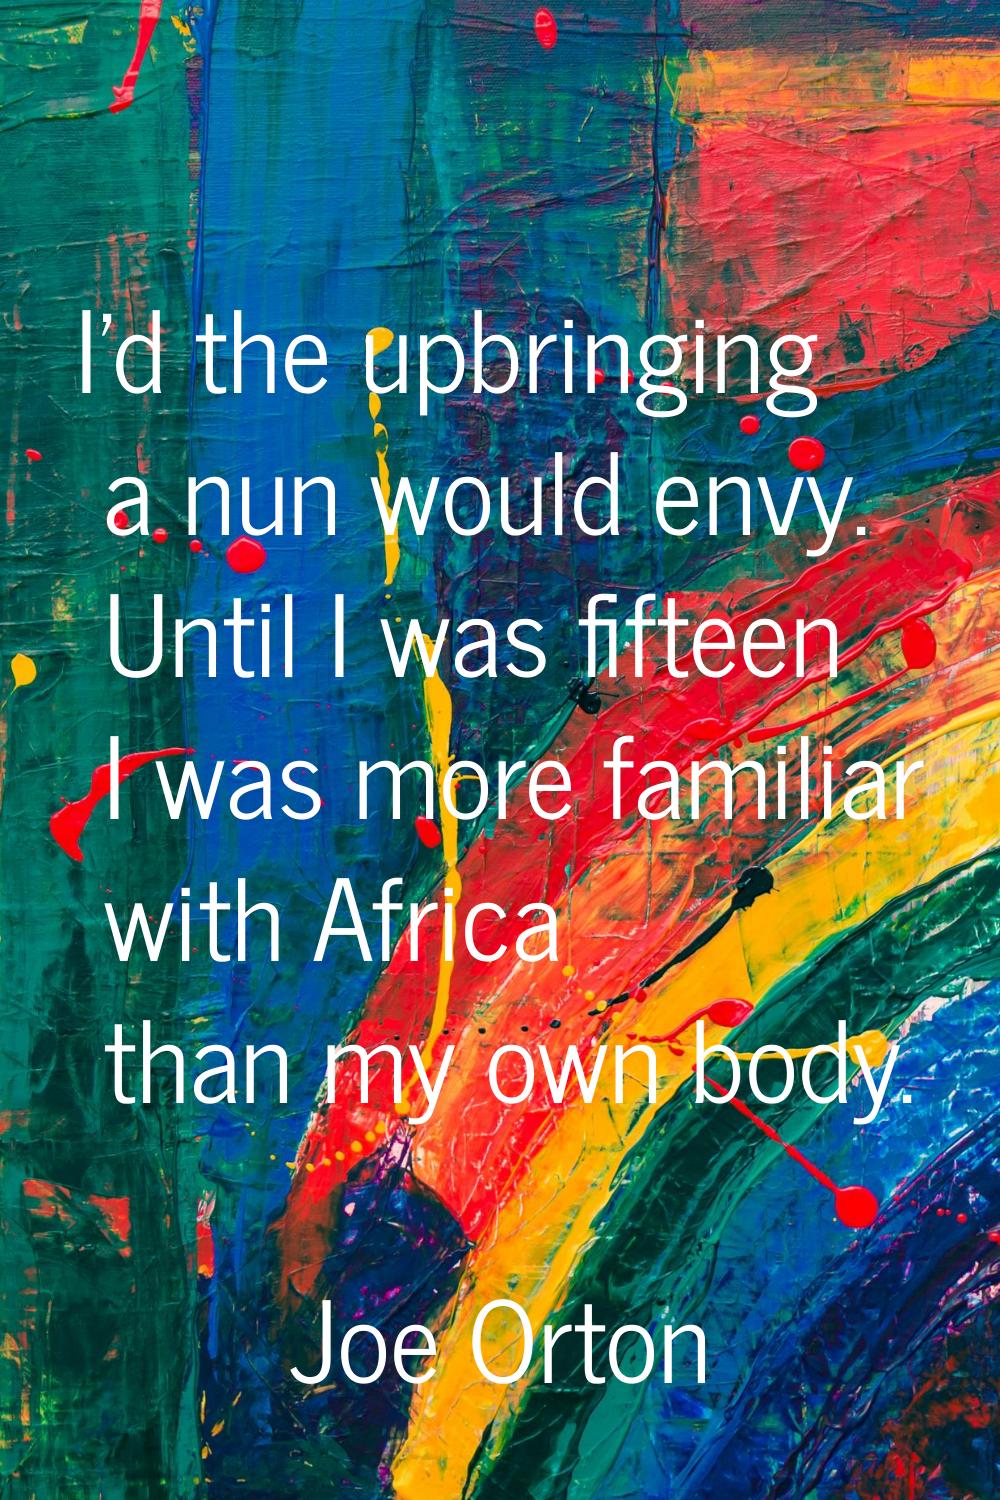 I'd the upbringing a nun would envy. Until I was fifteen I was more familiar with Africa than my ow